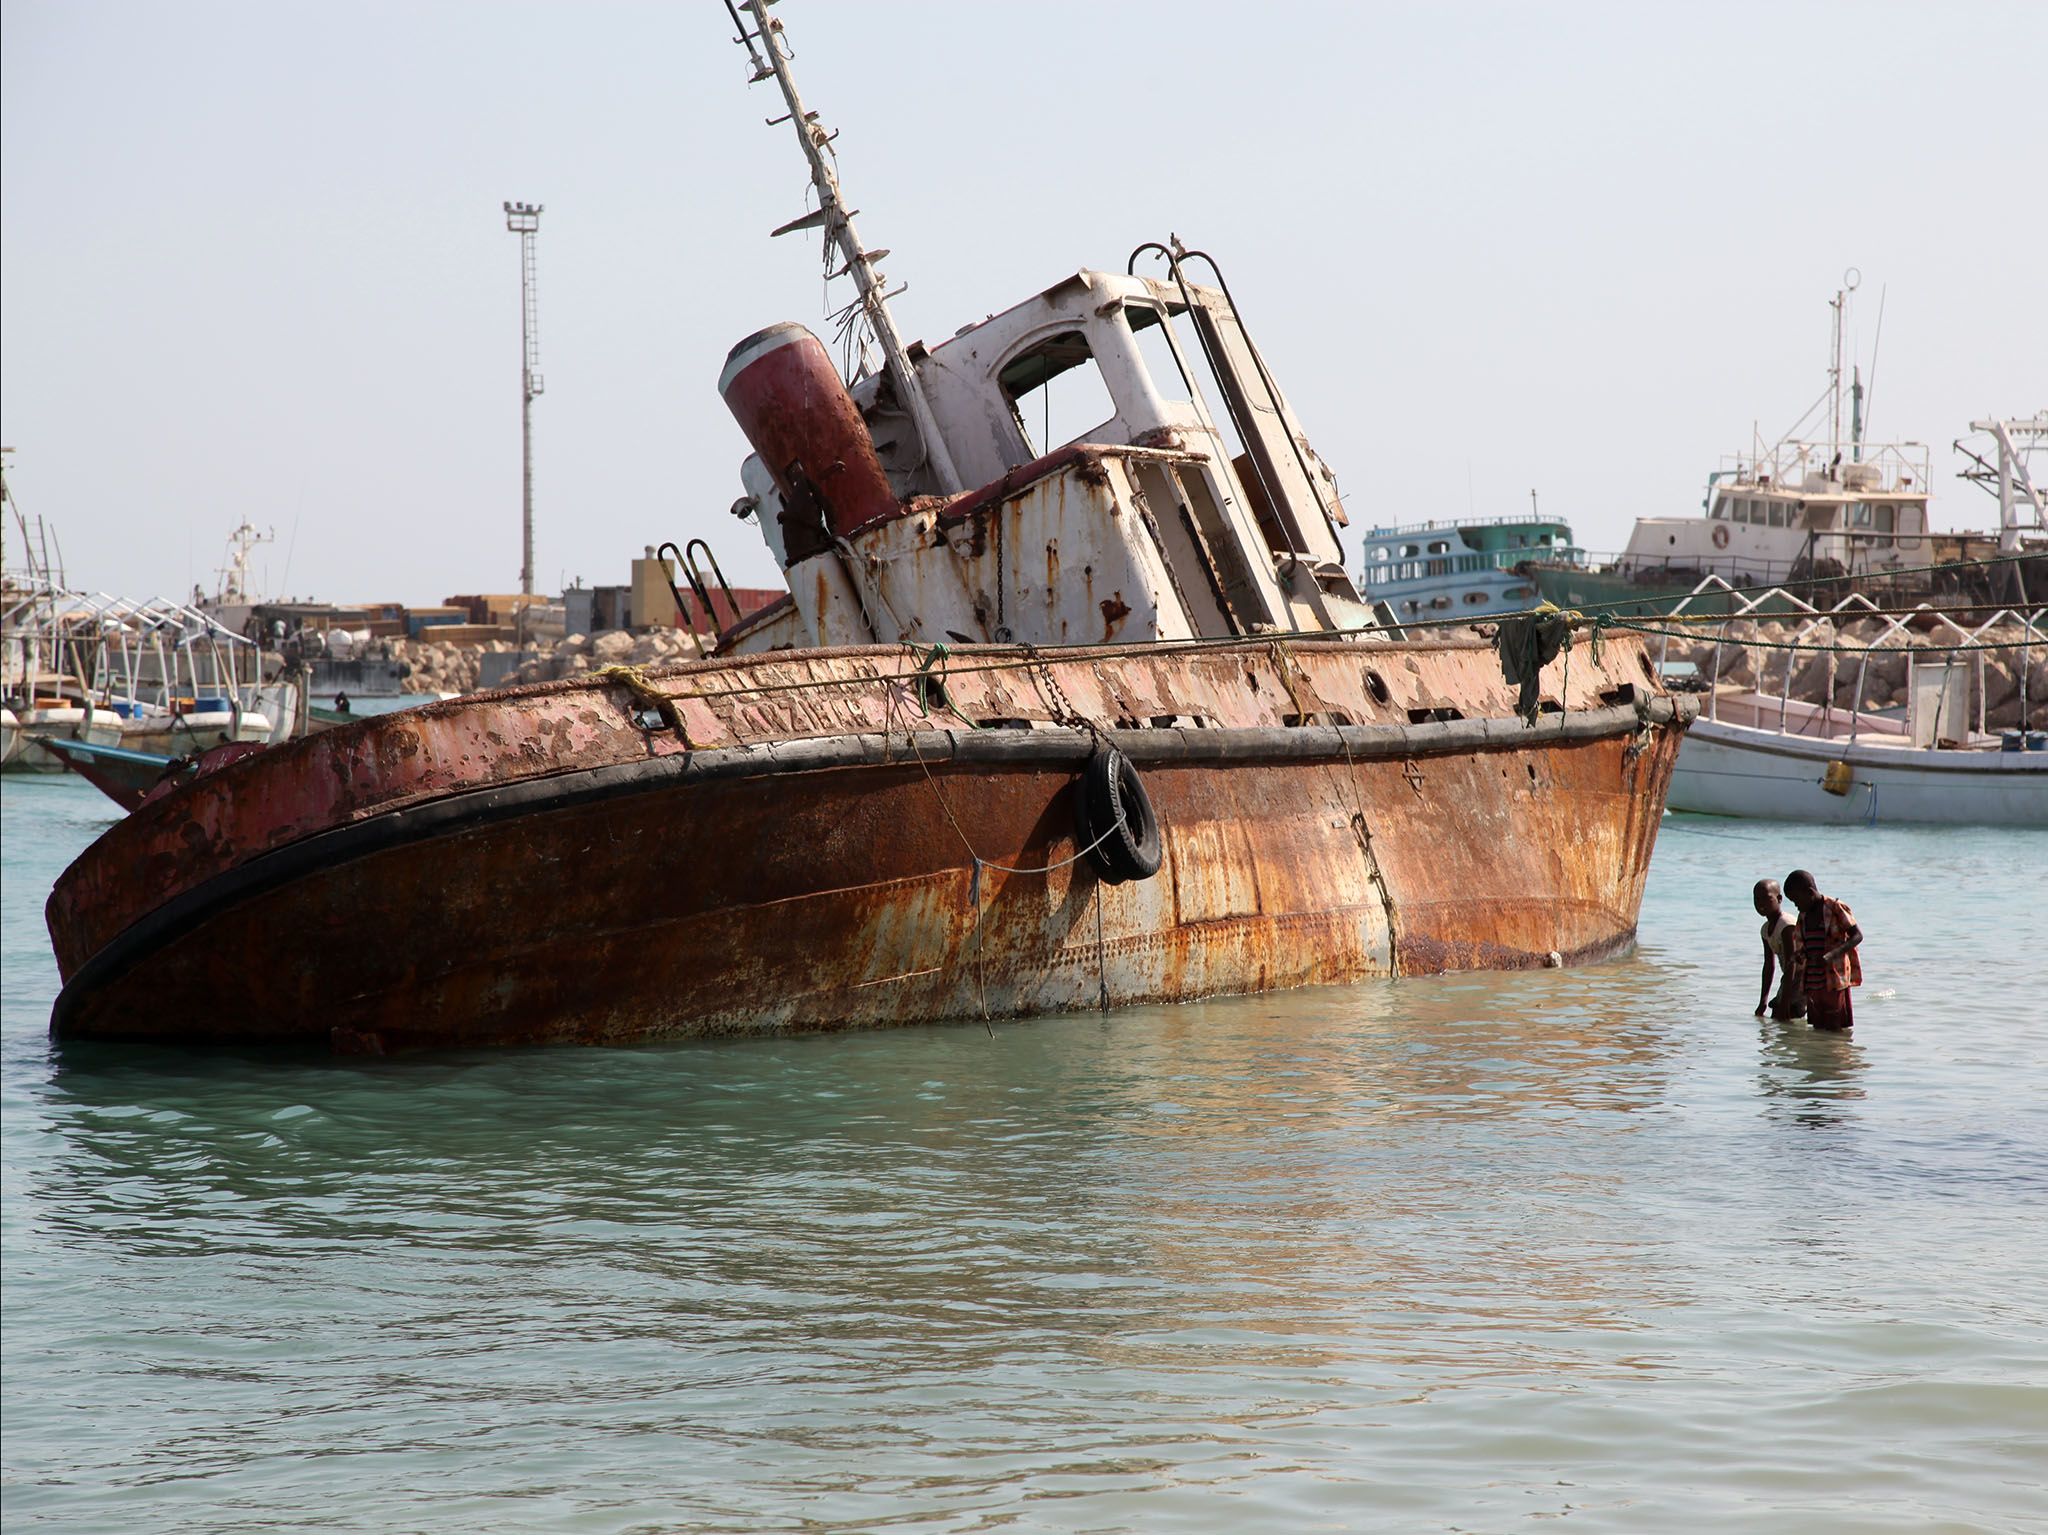 Basaso, Somalia: A shipwrecked boat near the shore in Basaso, Somalia. This image is from... [Photo of the day - March 2020]